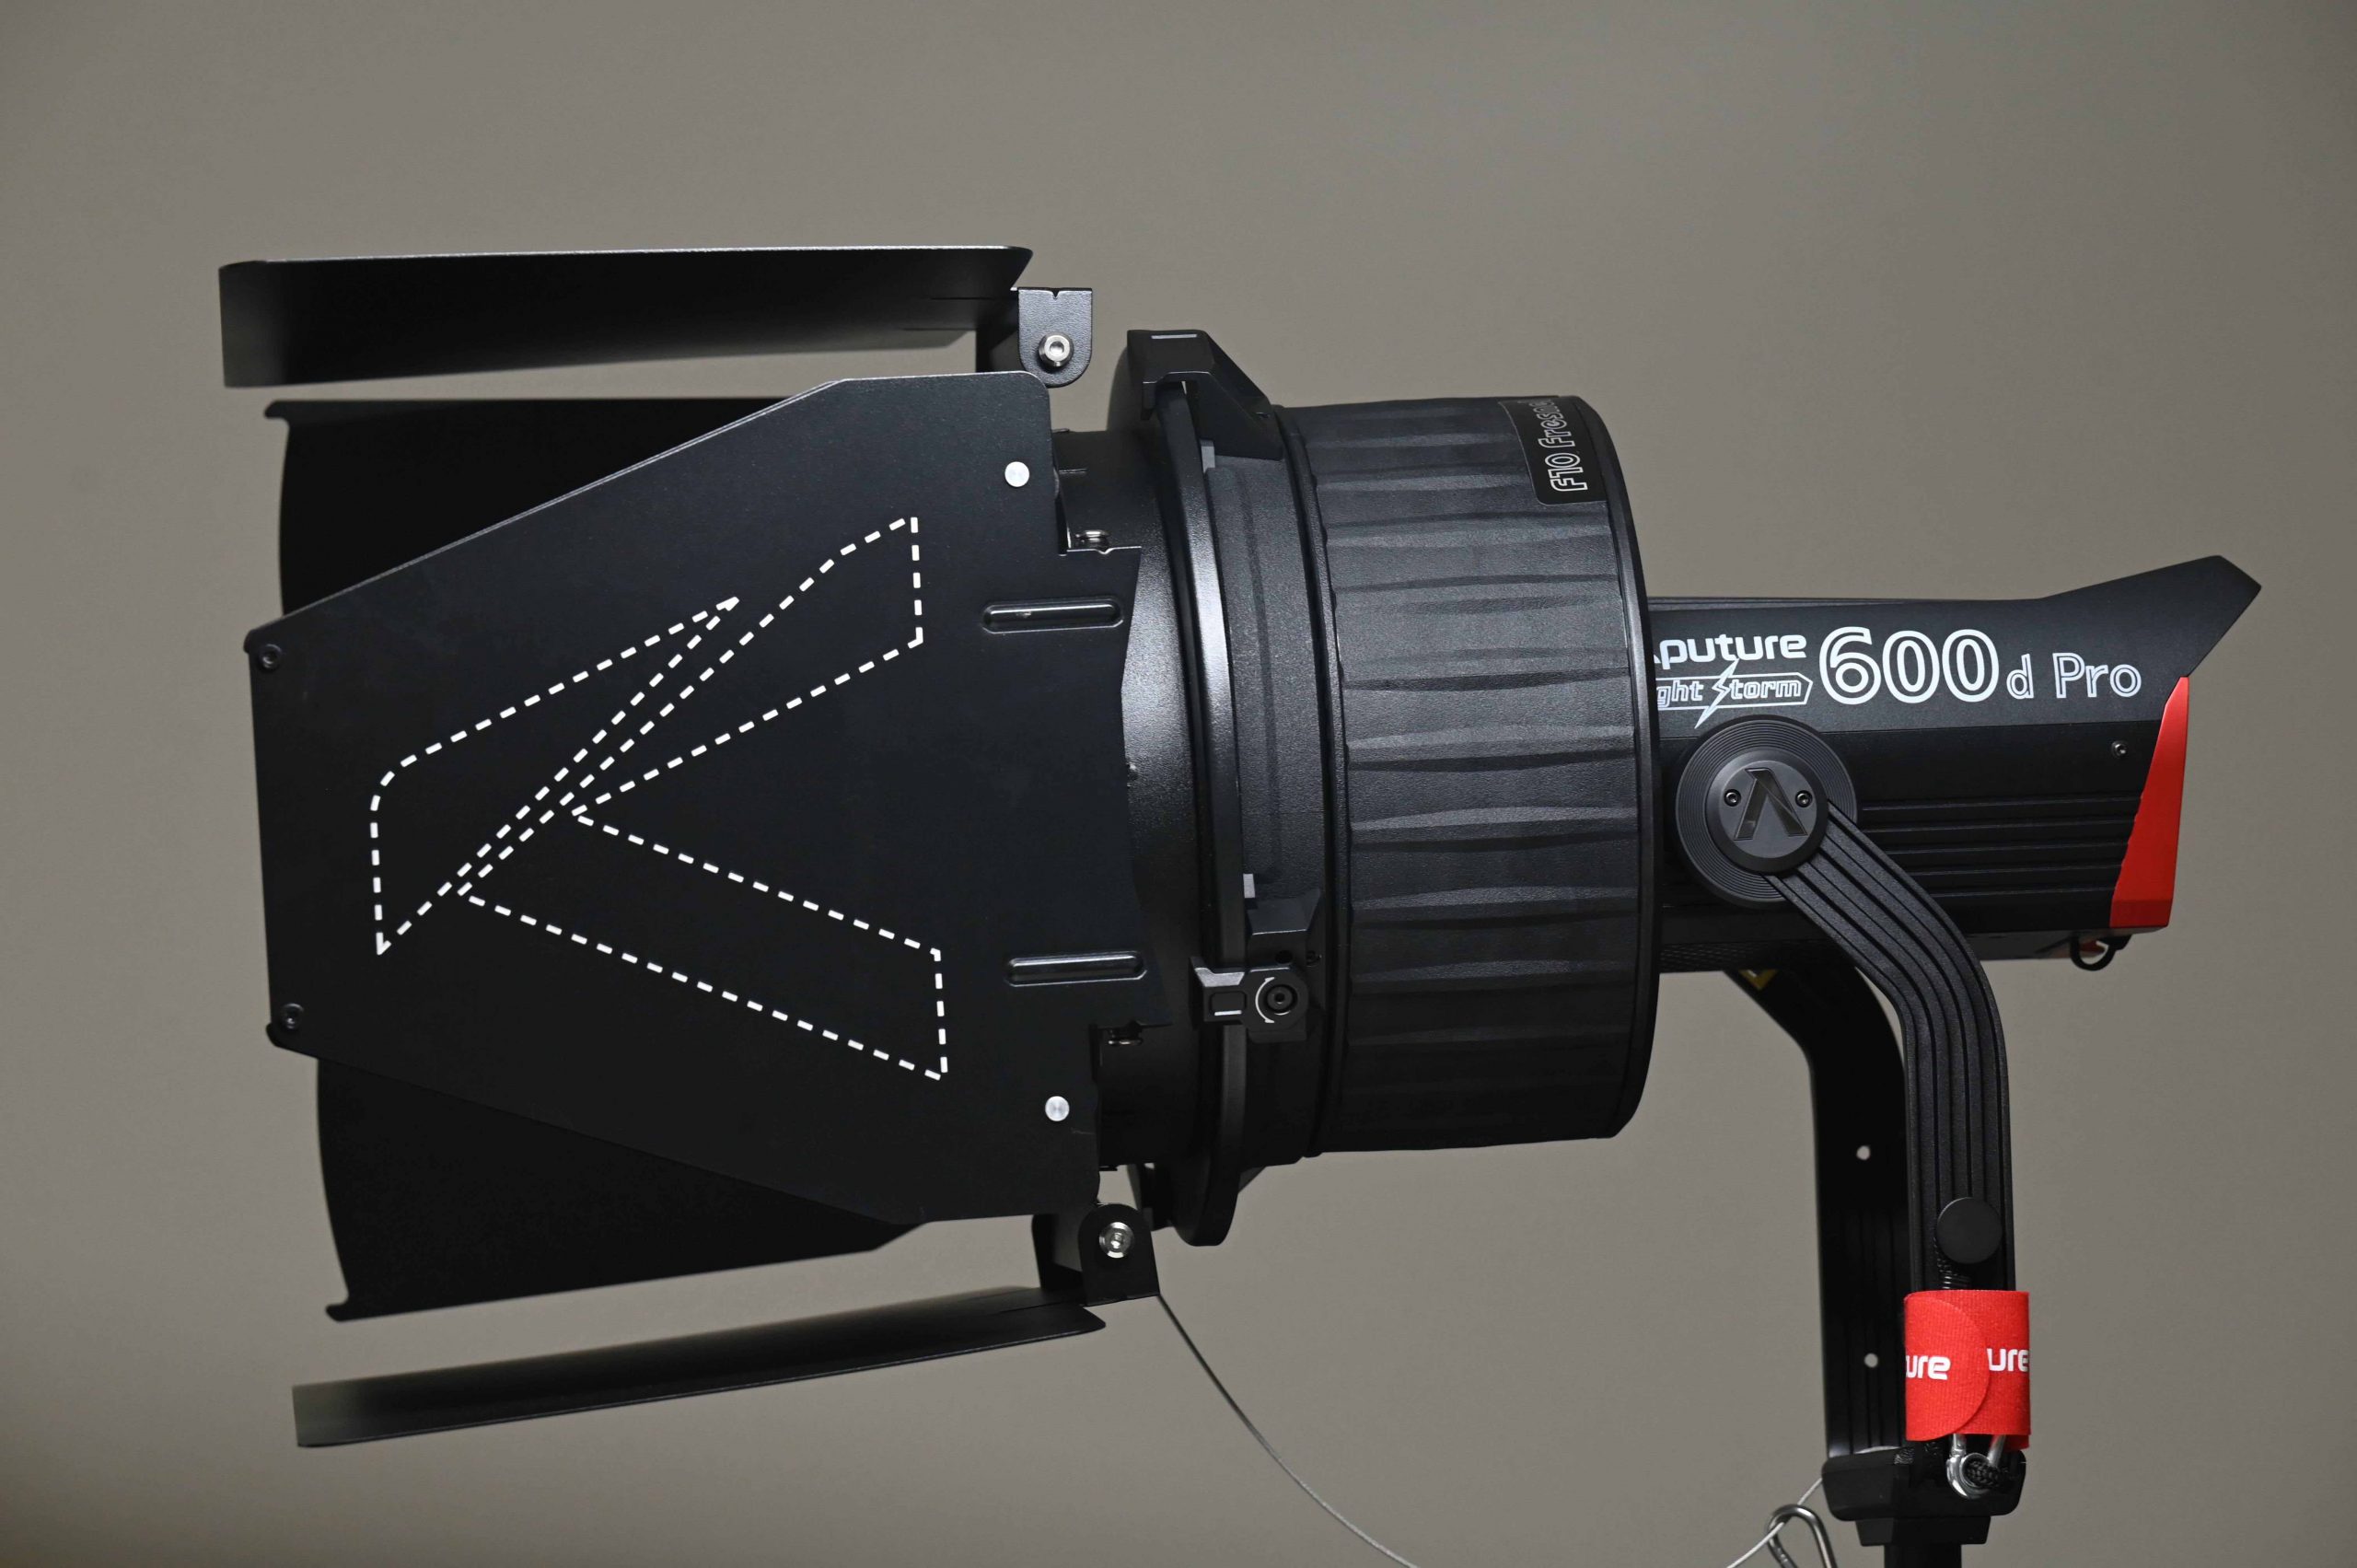 Aputure F10 Fresnel Attachment for the 600d Pro Review - Newsshooter